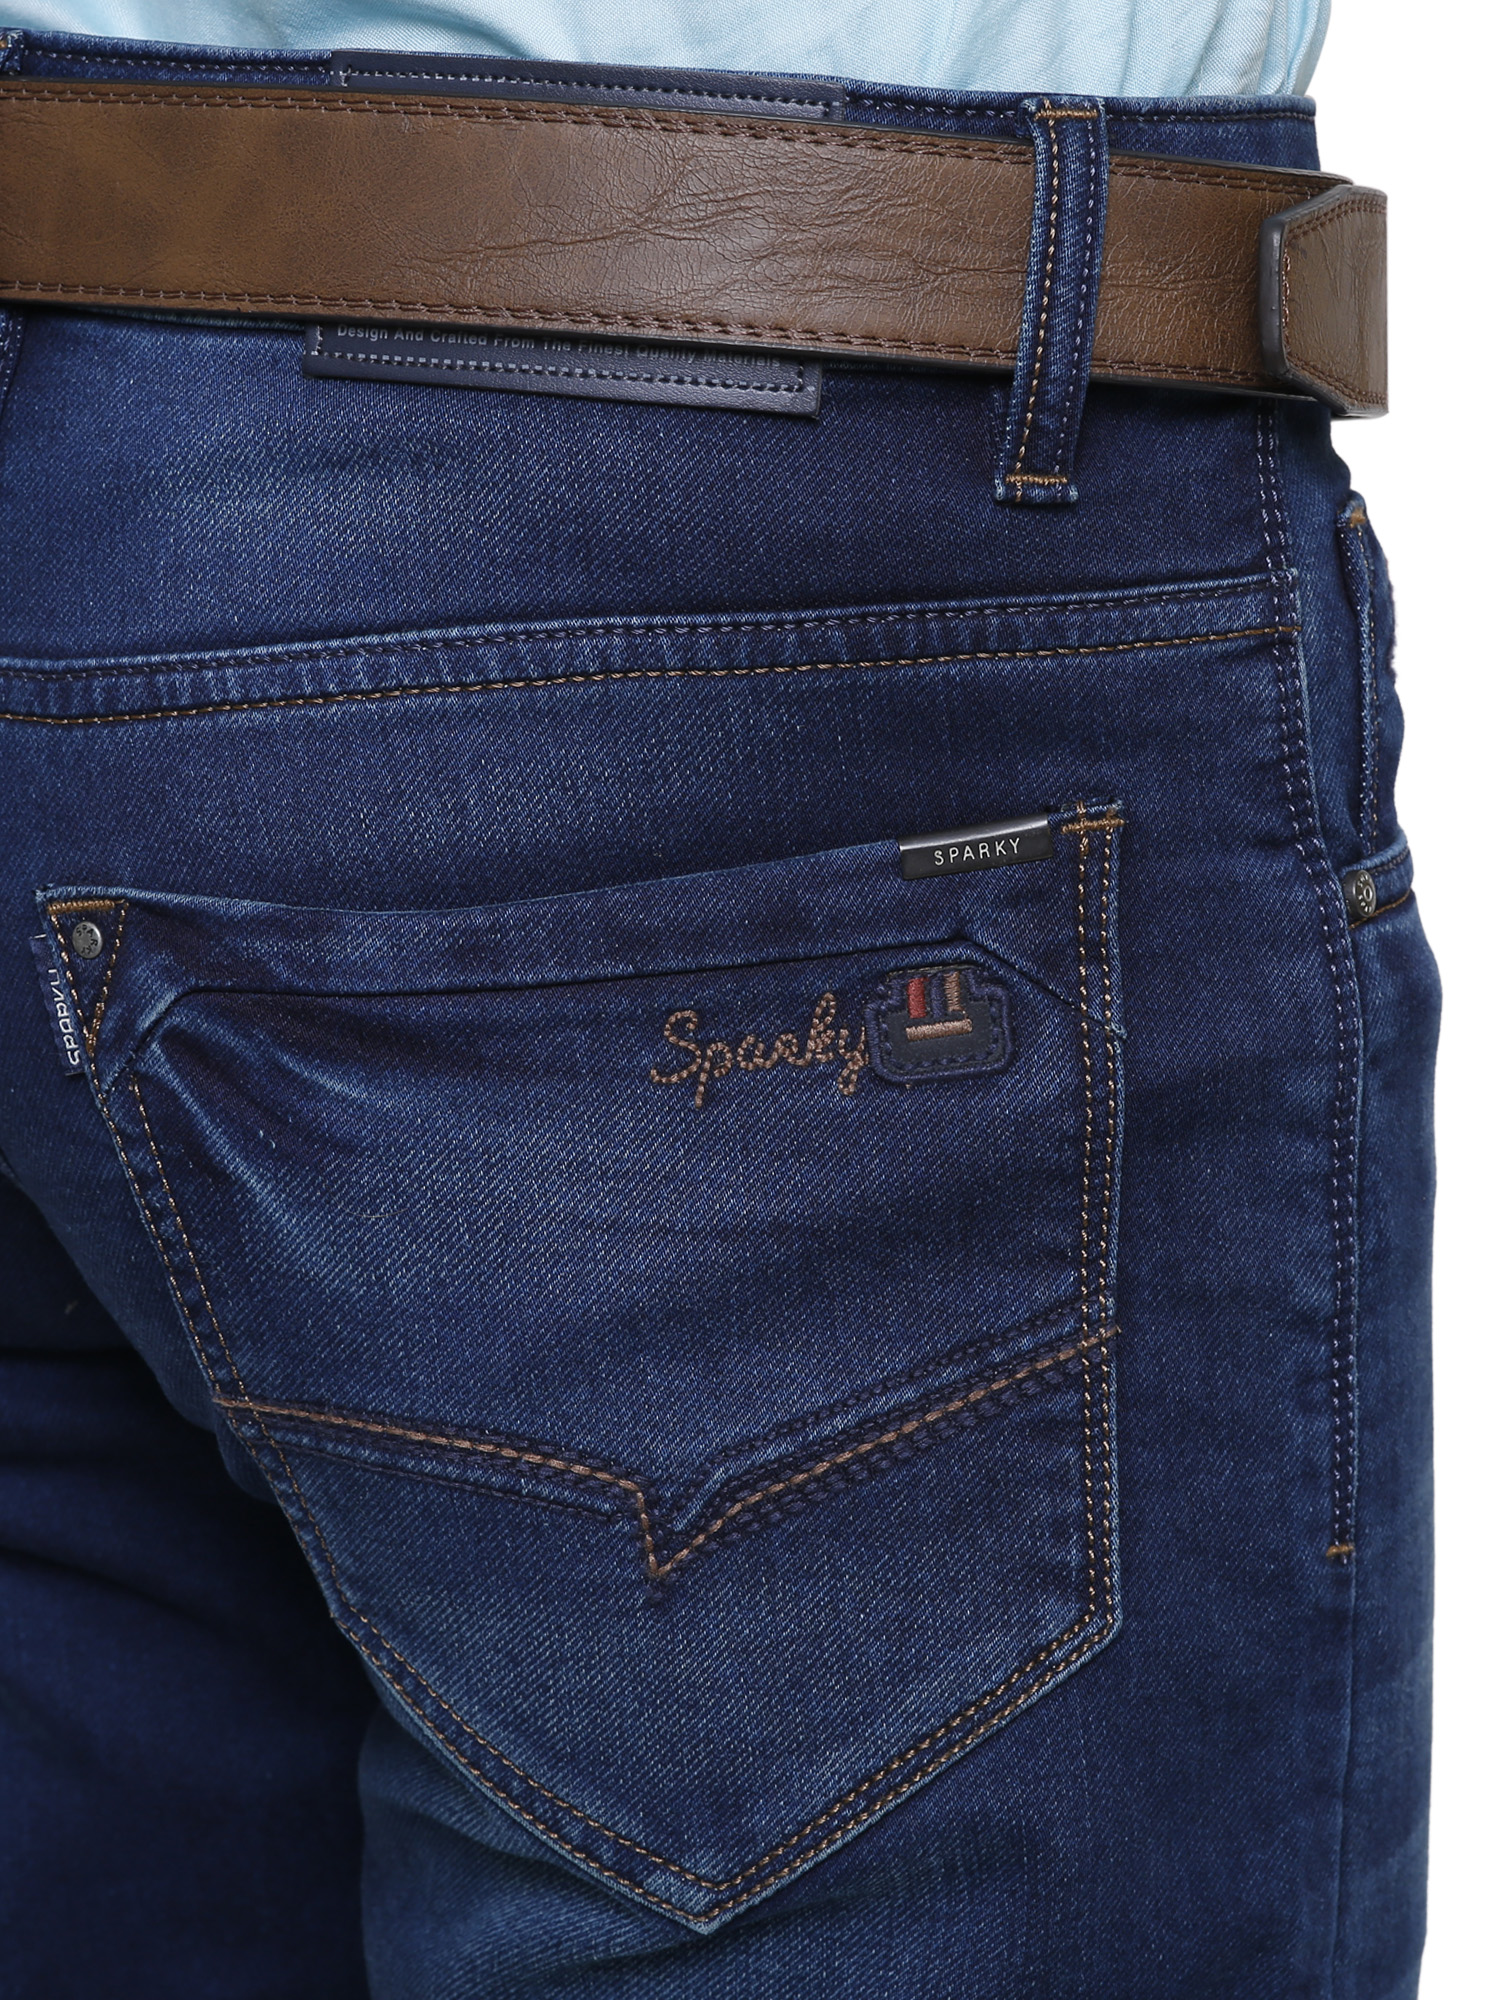 SparkyJeans- India's leading fashion brand